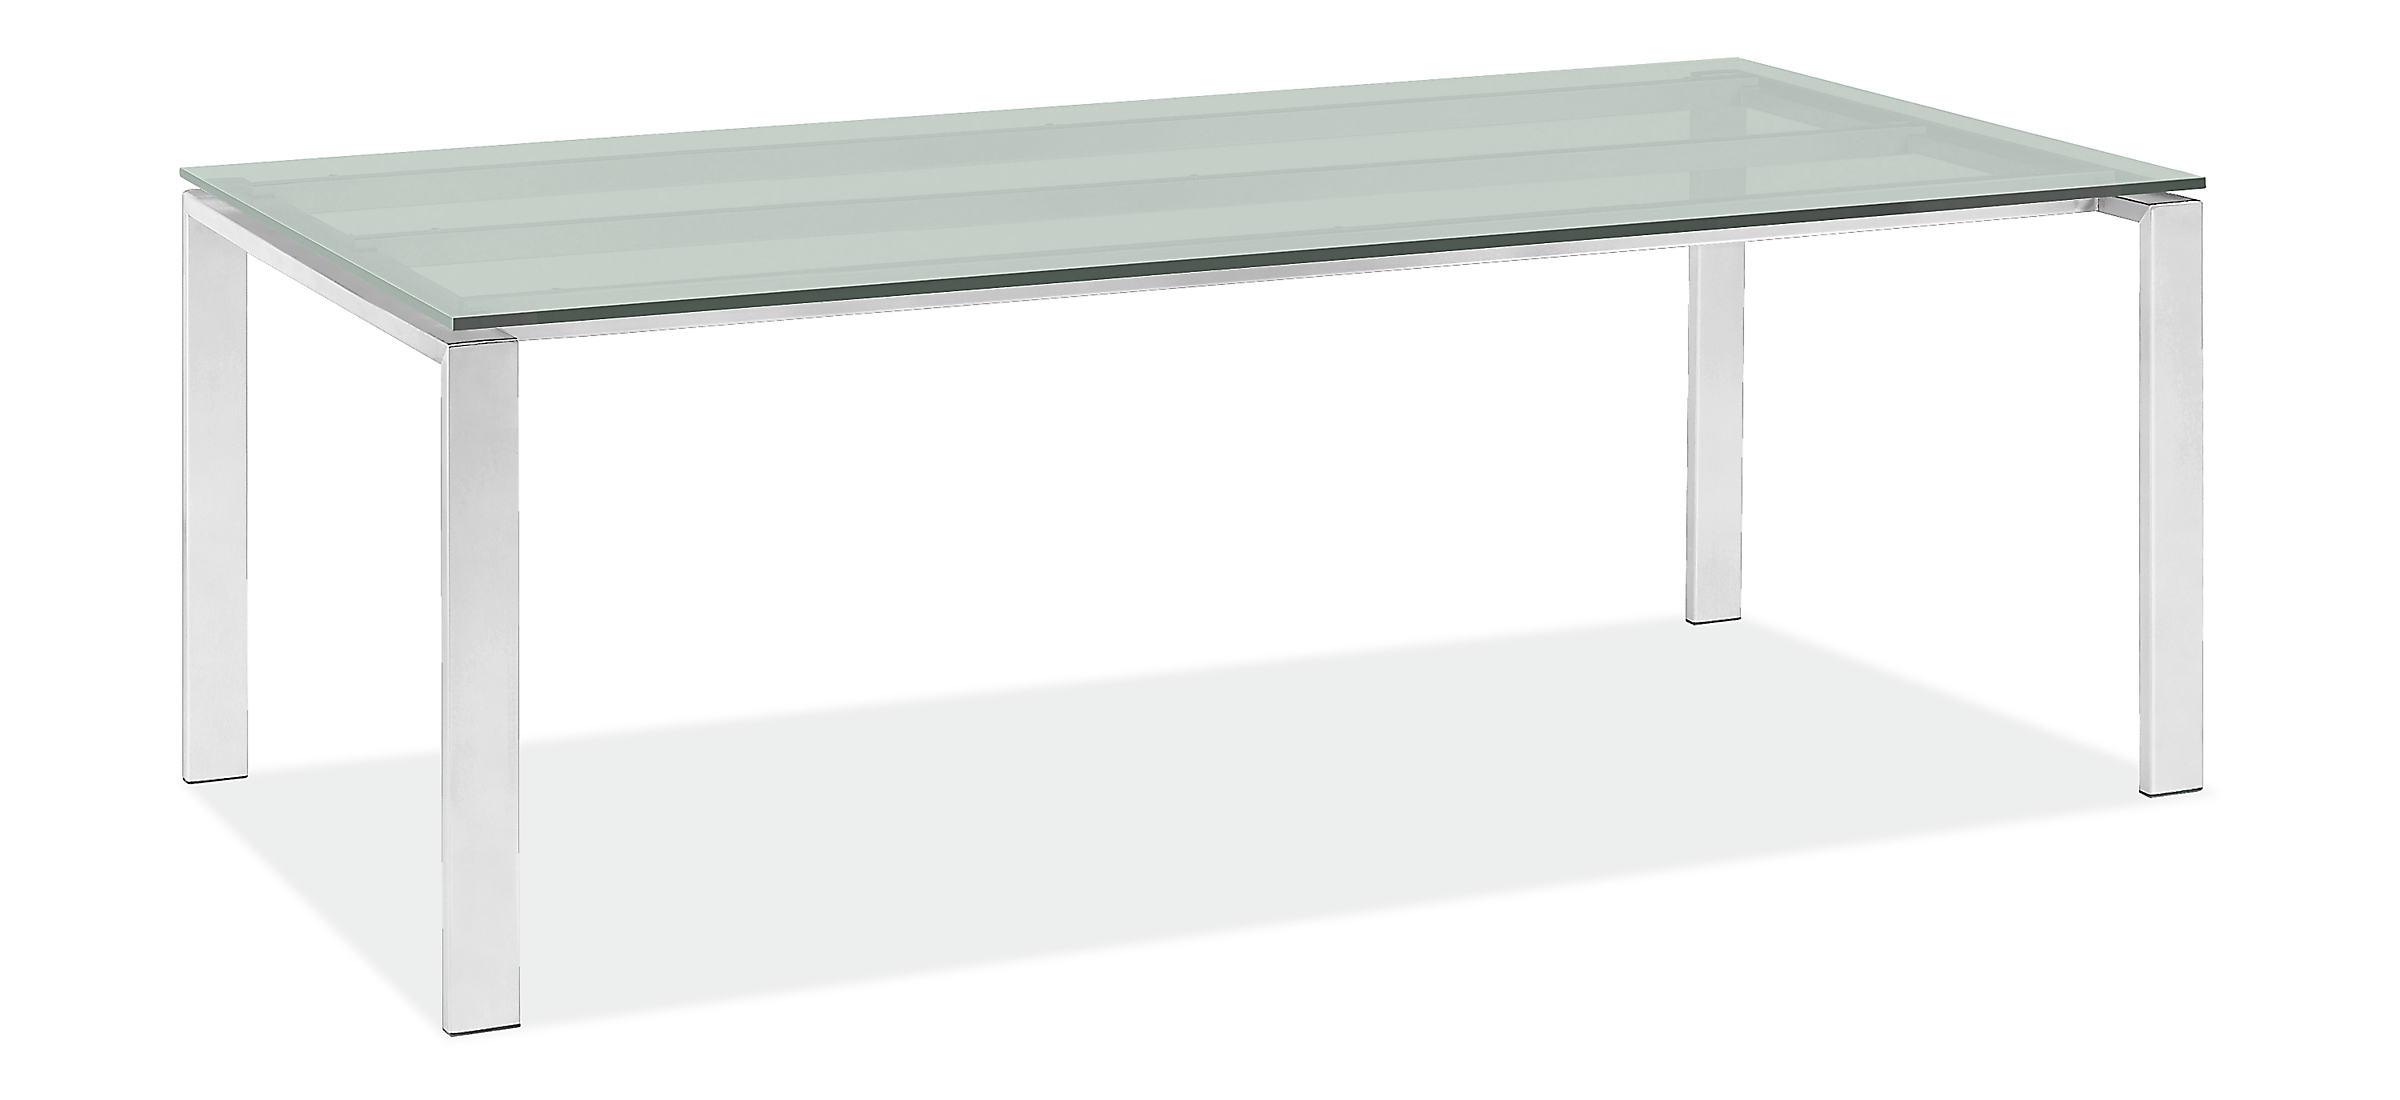 Rand 78w 48d 29h Table in Stainless Steel with Satin Etched Tempered Glass Top